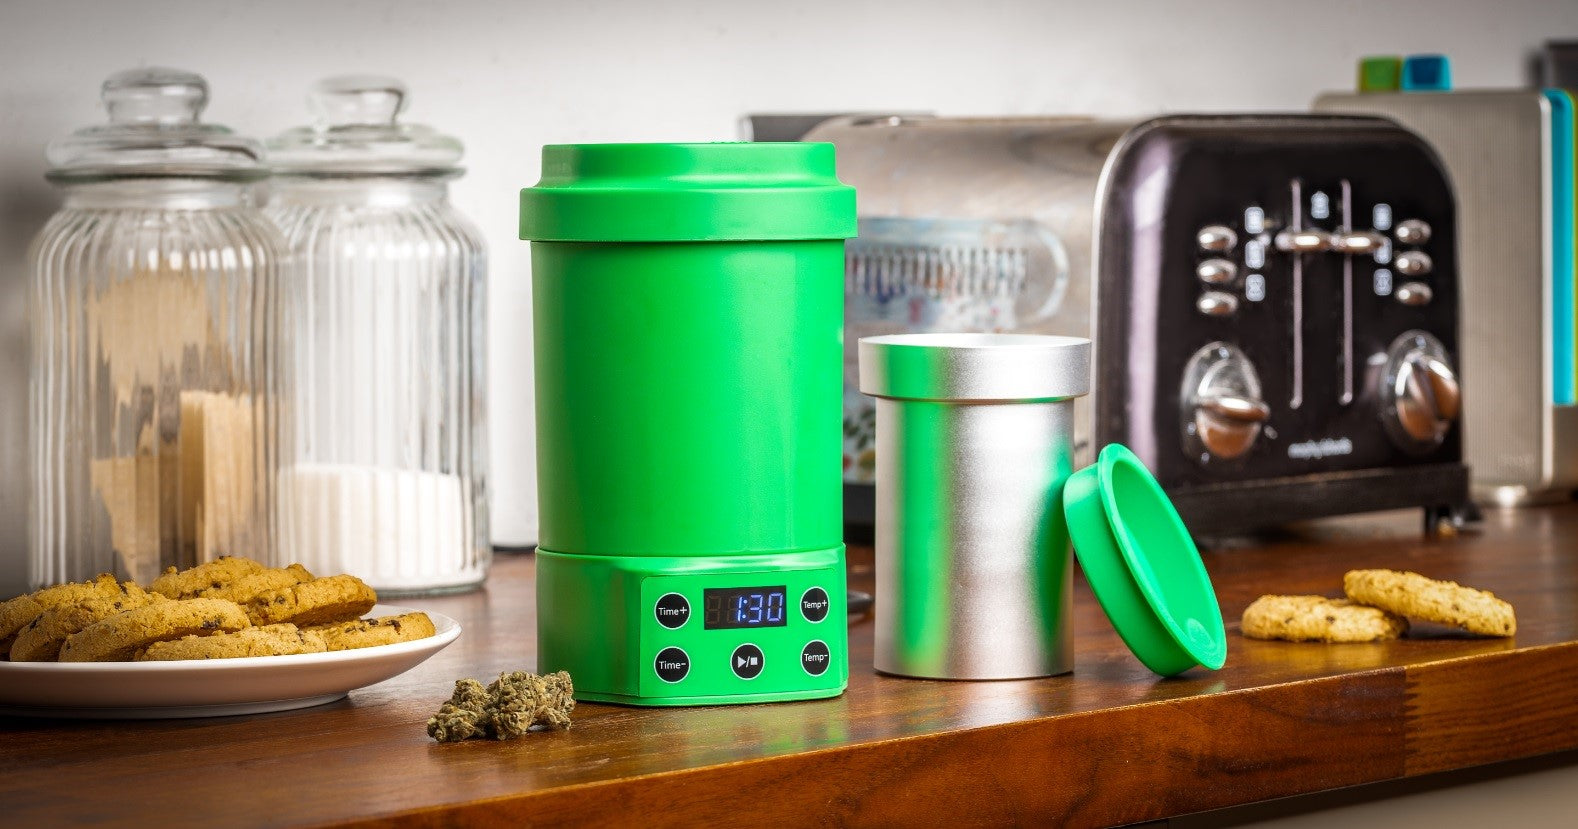 Nebula Boost Decarboxylator & Infuser machine for Botanicals, Herb, Oils, Oral, Sublingual and Topical Use. Increases potency and purity to help improve the strength, taste, quality and overall effectiveness of your botanicals.